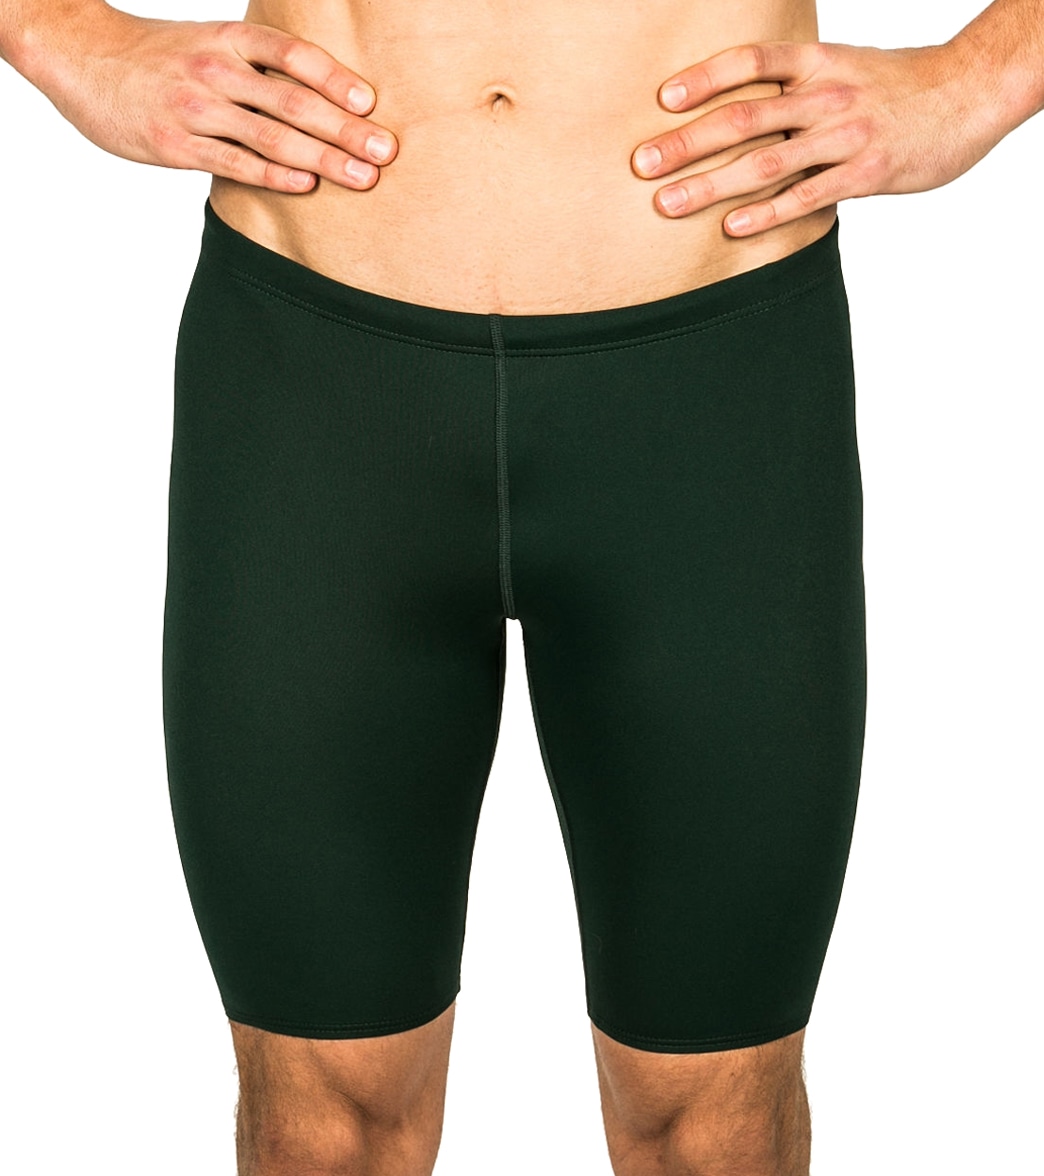 Finis Men's Solid Jammer Swimsuit - Pine 26 - Swimoutlet.com